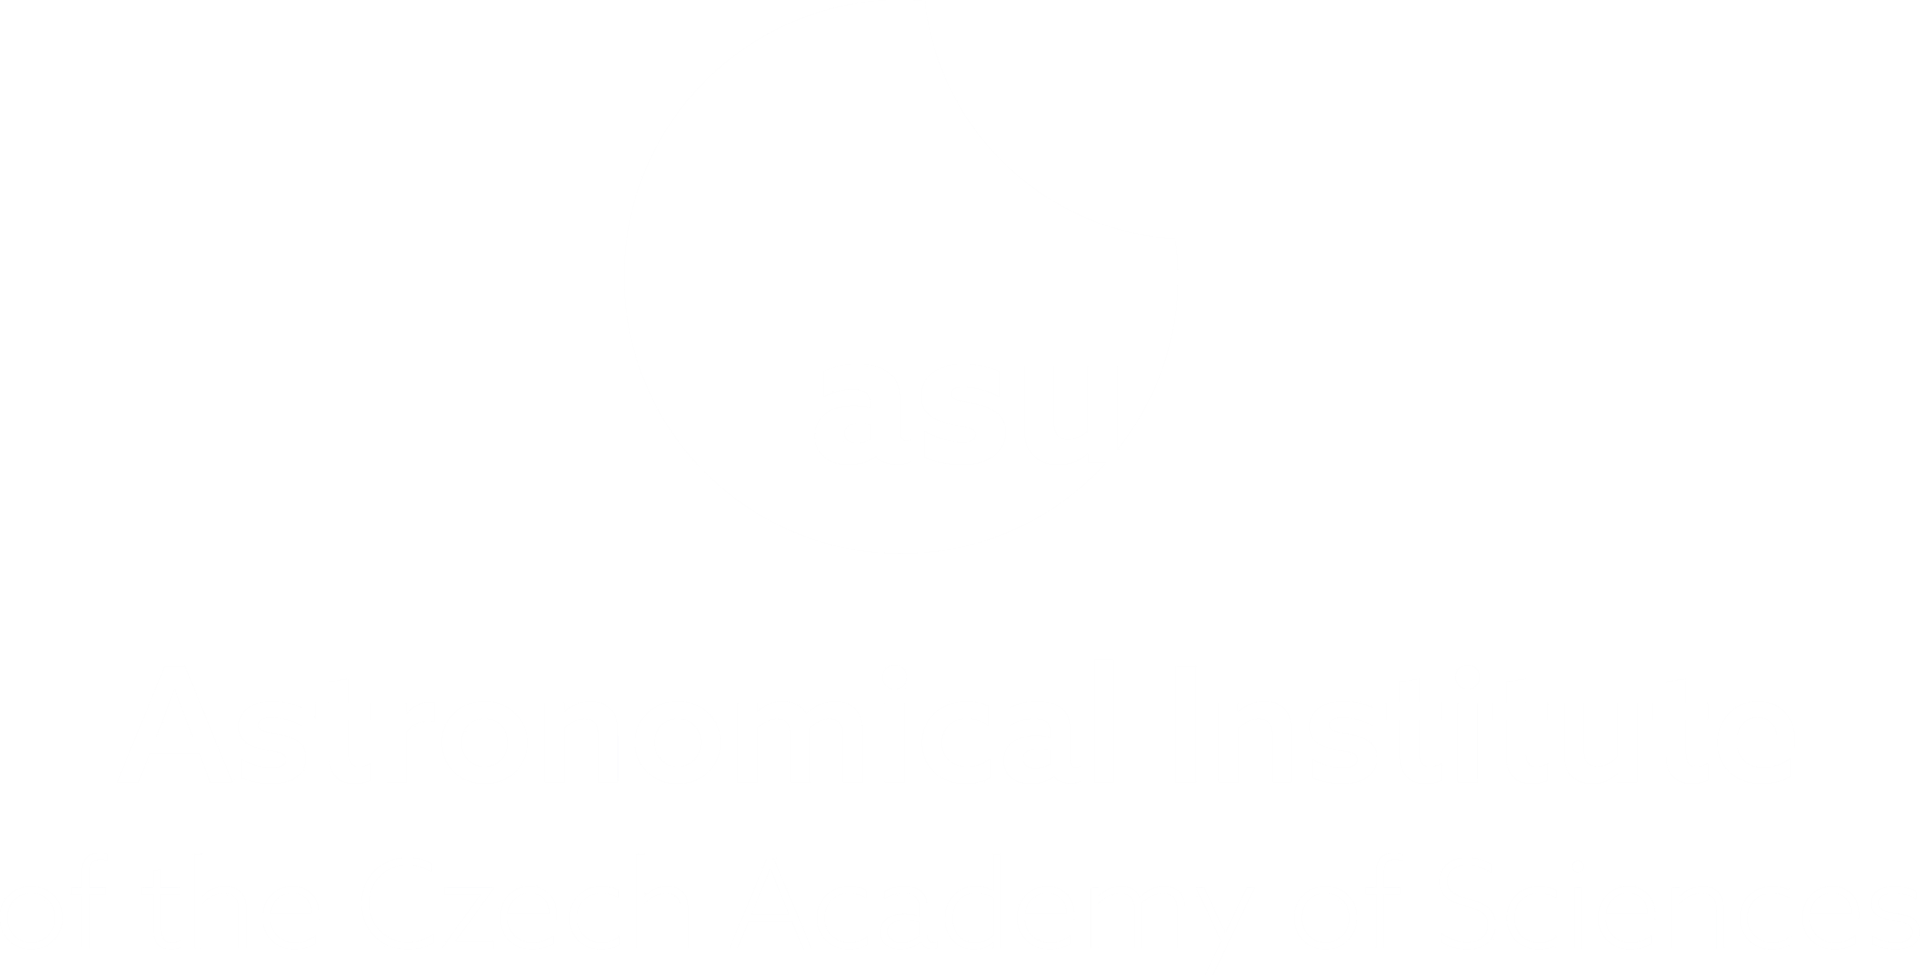 Astronomical Institute of the Czech Academy of Sciences